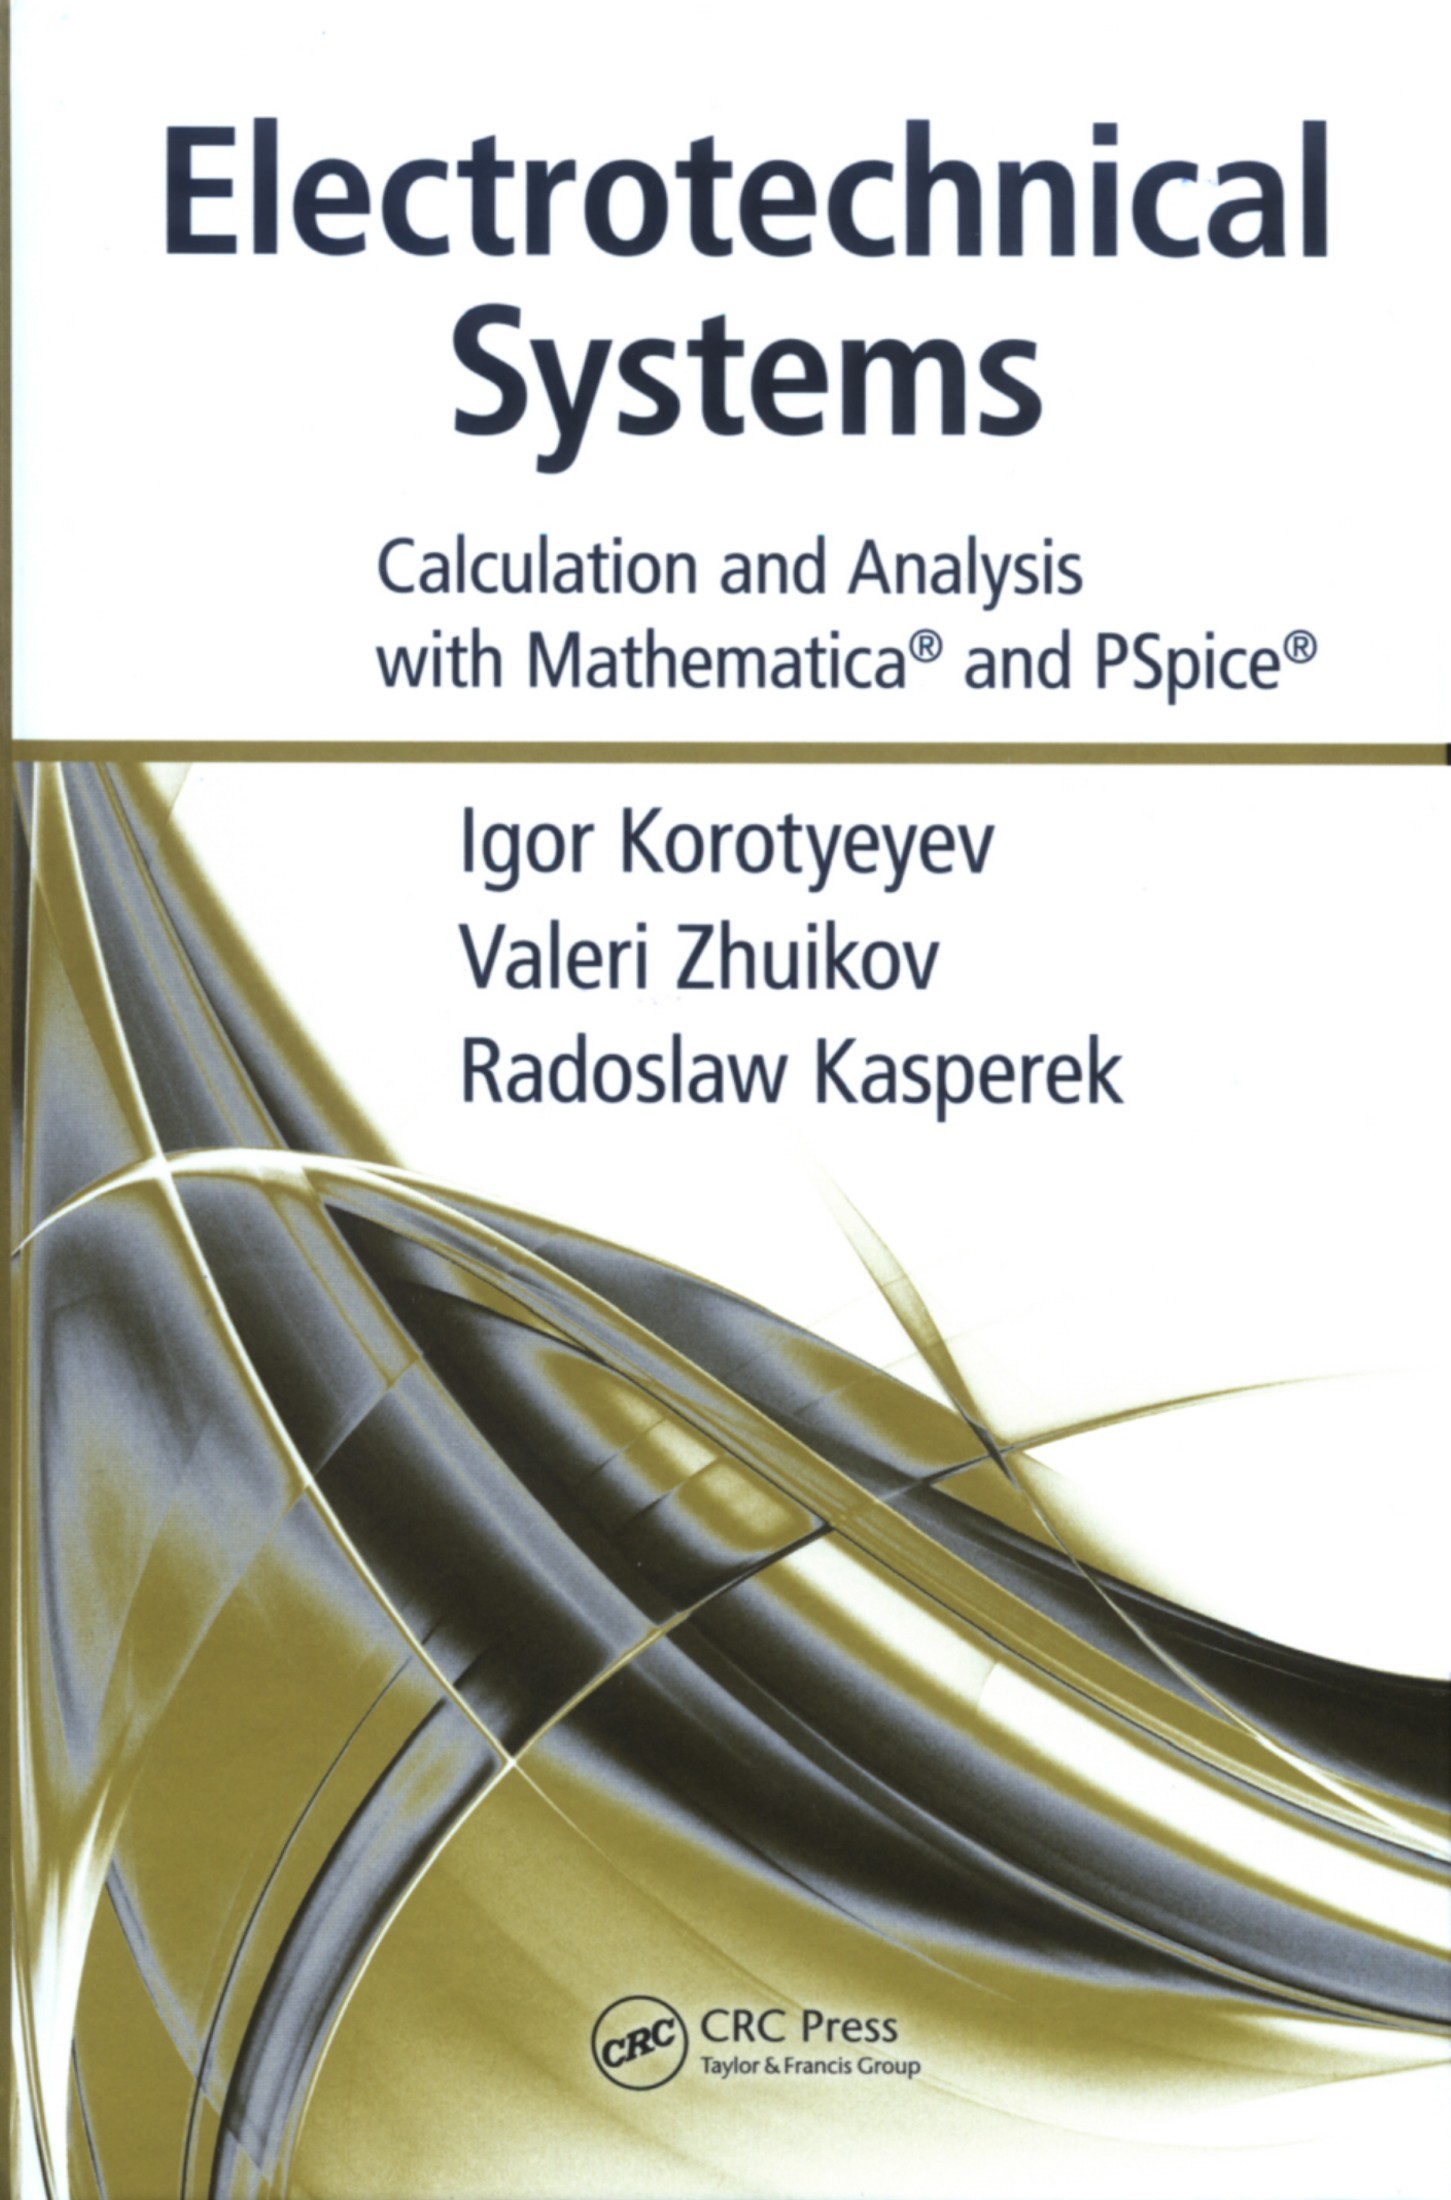 Electrotechnical Systems: Calculation and Analysis with Mathematica® and PSpice®